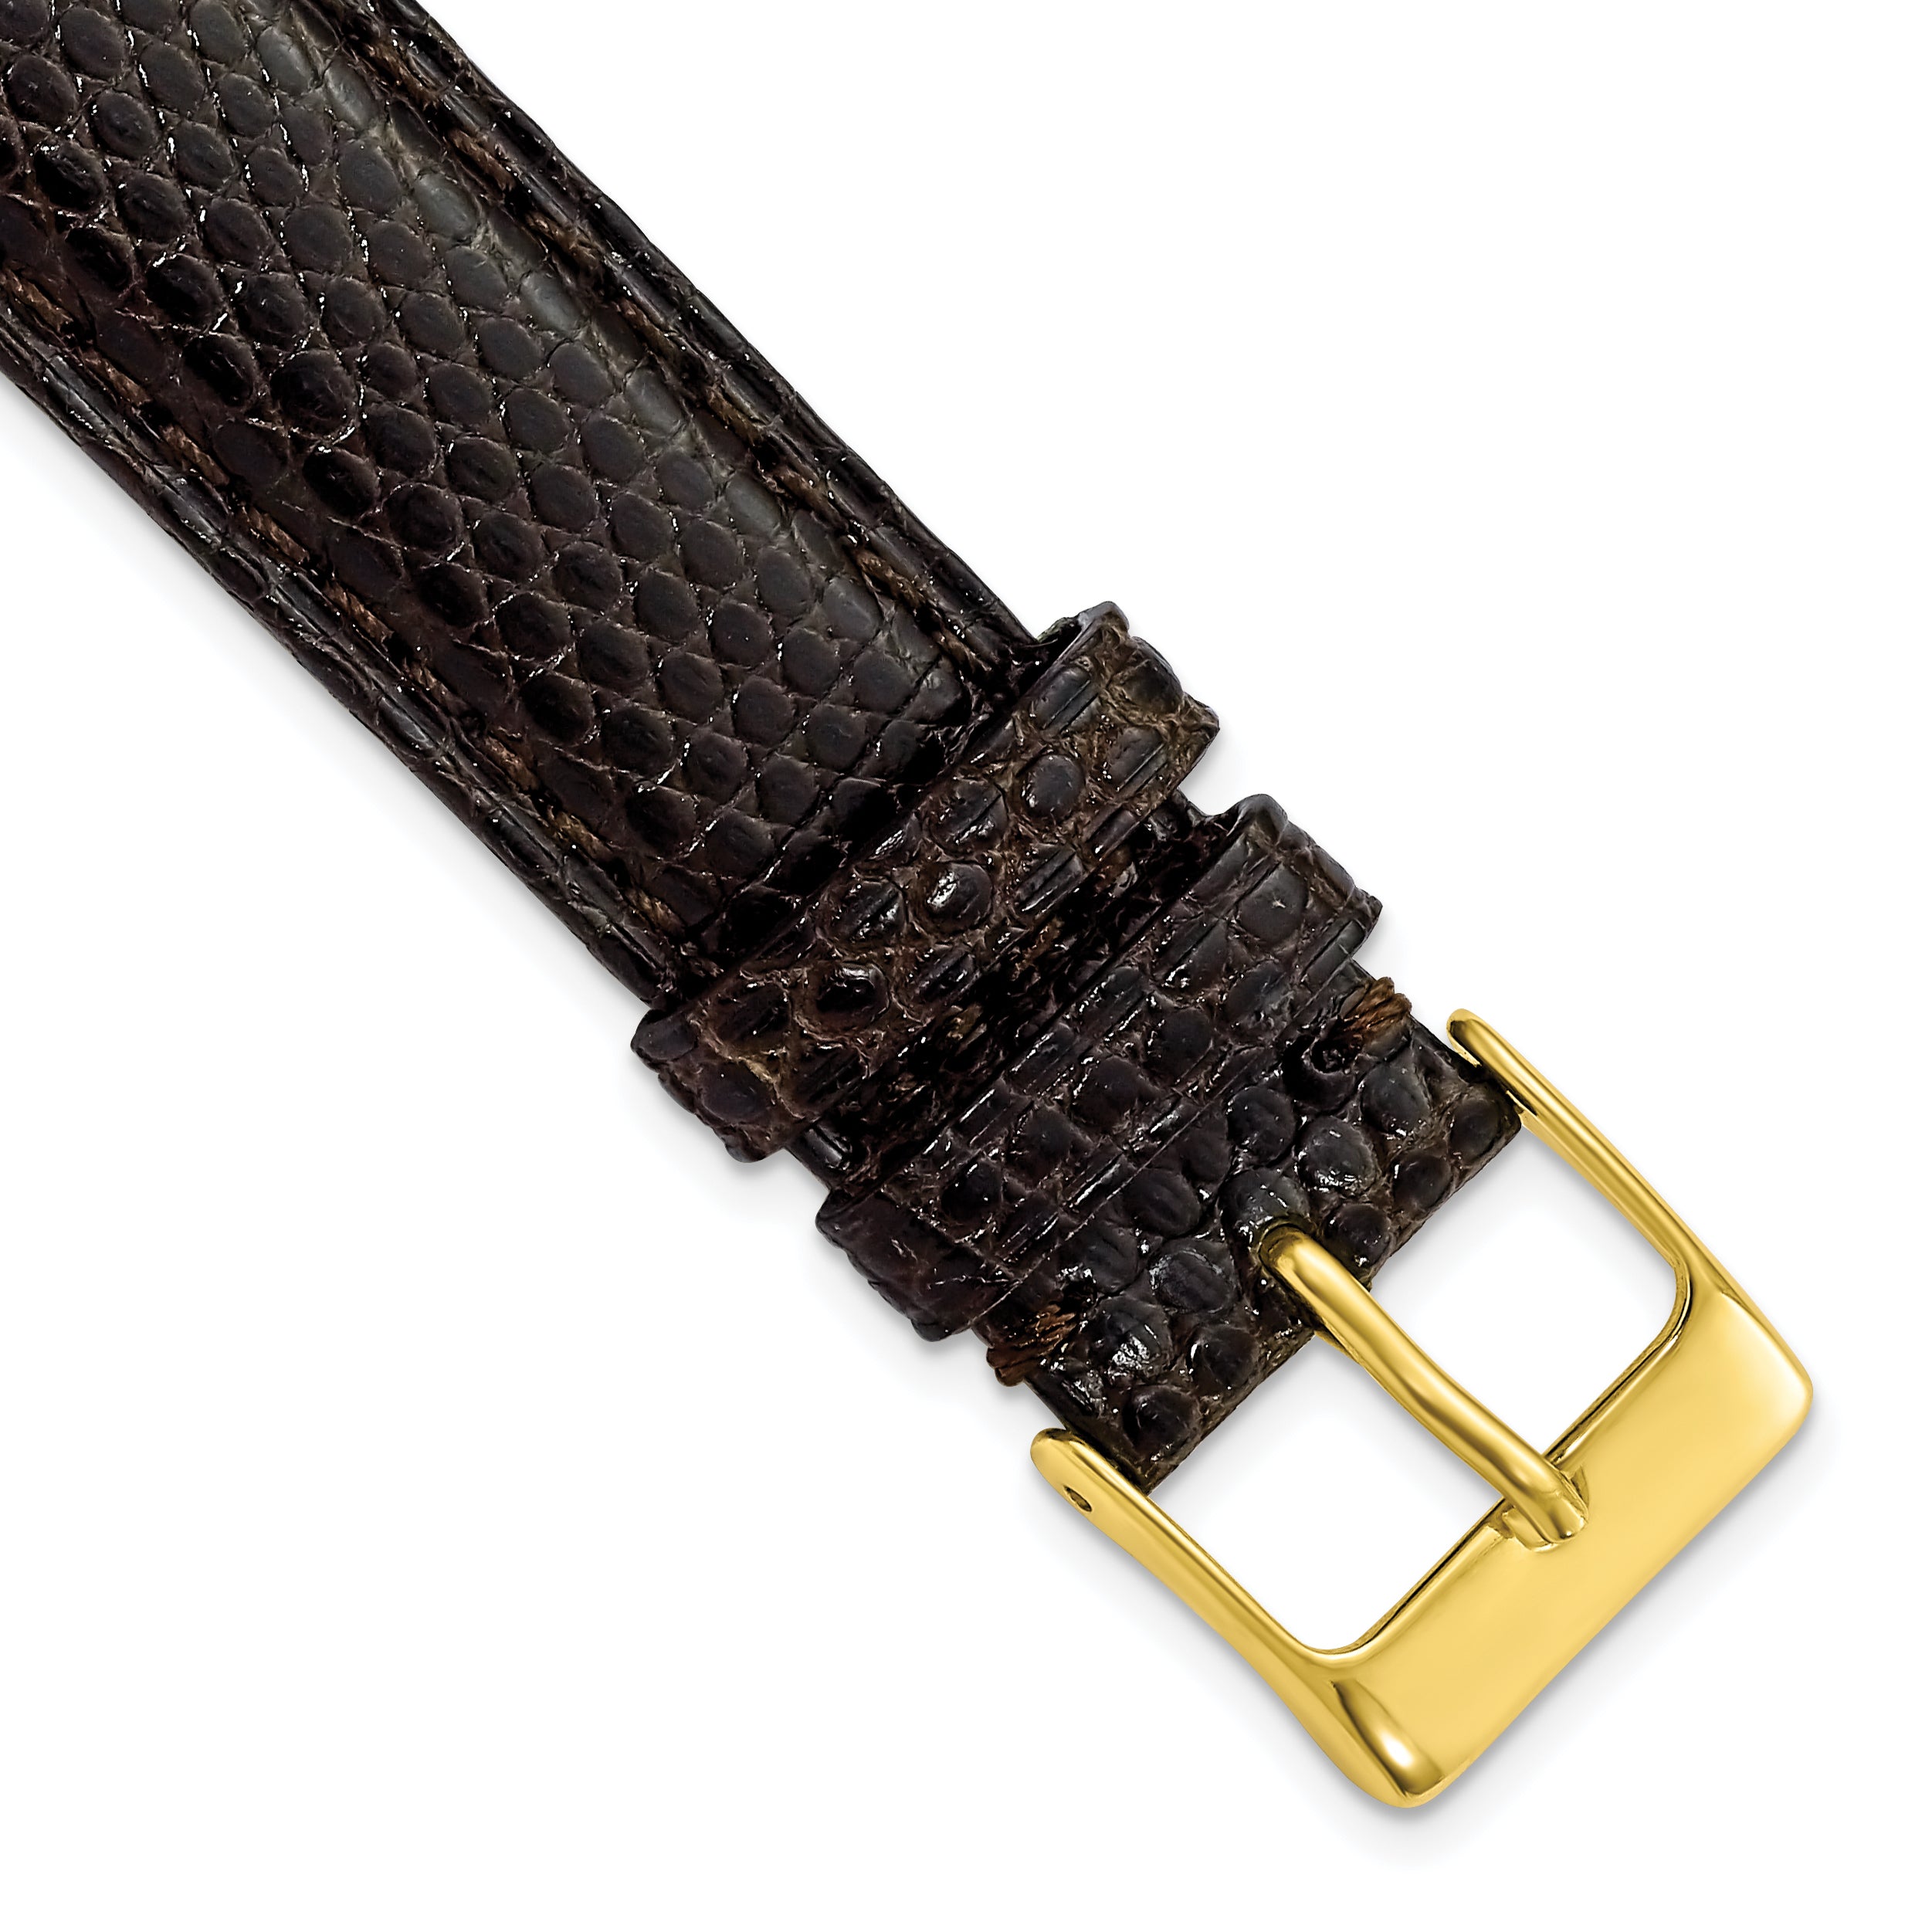 DeBeer 17mm Black Genuine Lizard Leather with Gold-tone Buckle 7.5 inch Watch Band